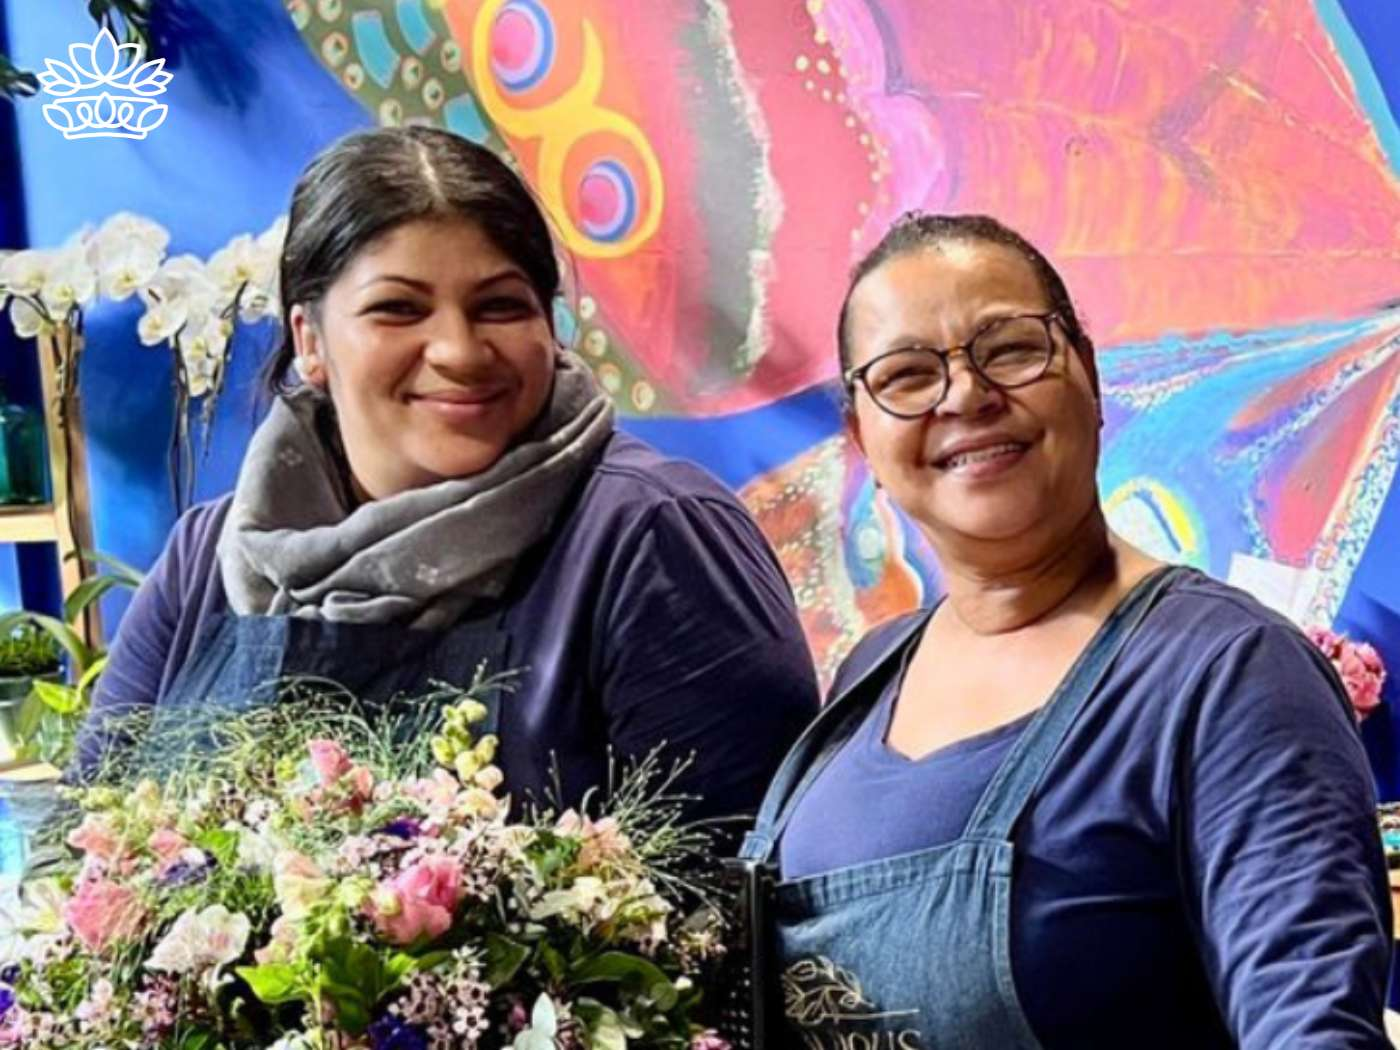 Two smiling florists in aprons, proudly standing by a colourful floral display arrangement, bringing joy and artistry to Fabulous Flowers and Gifts.